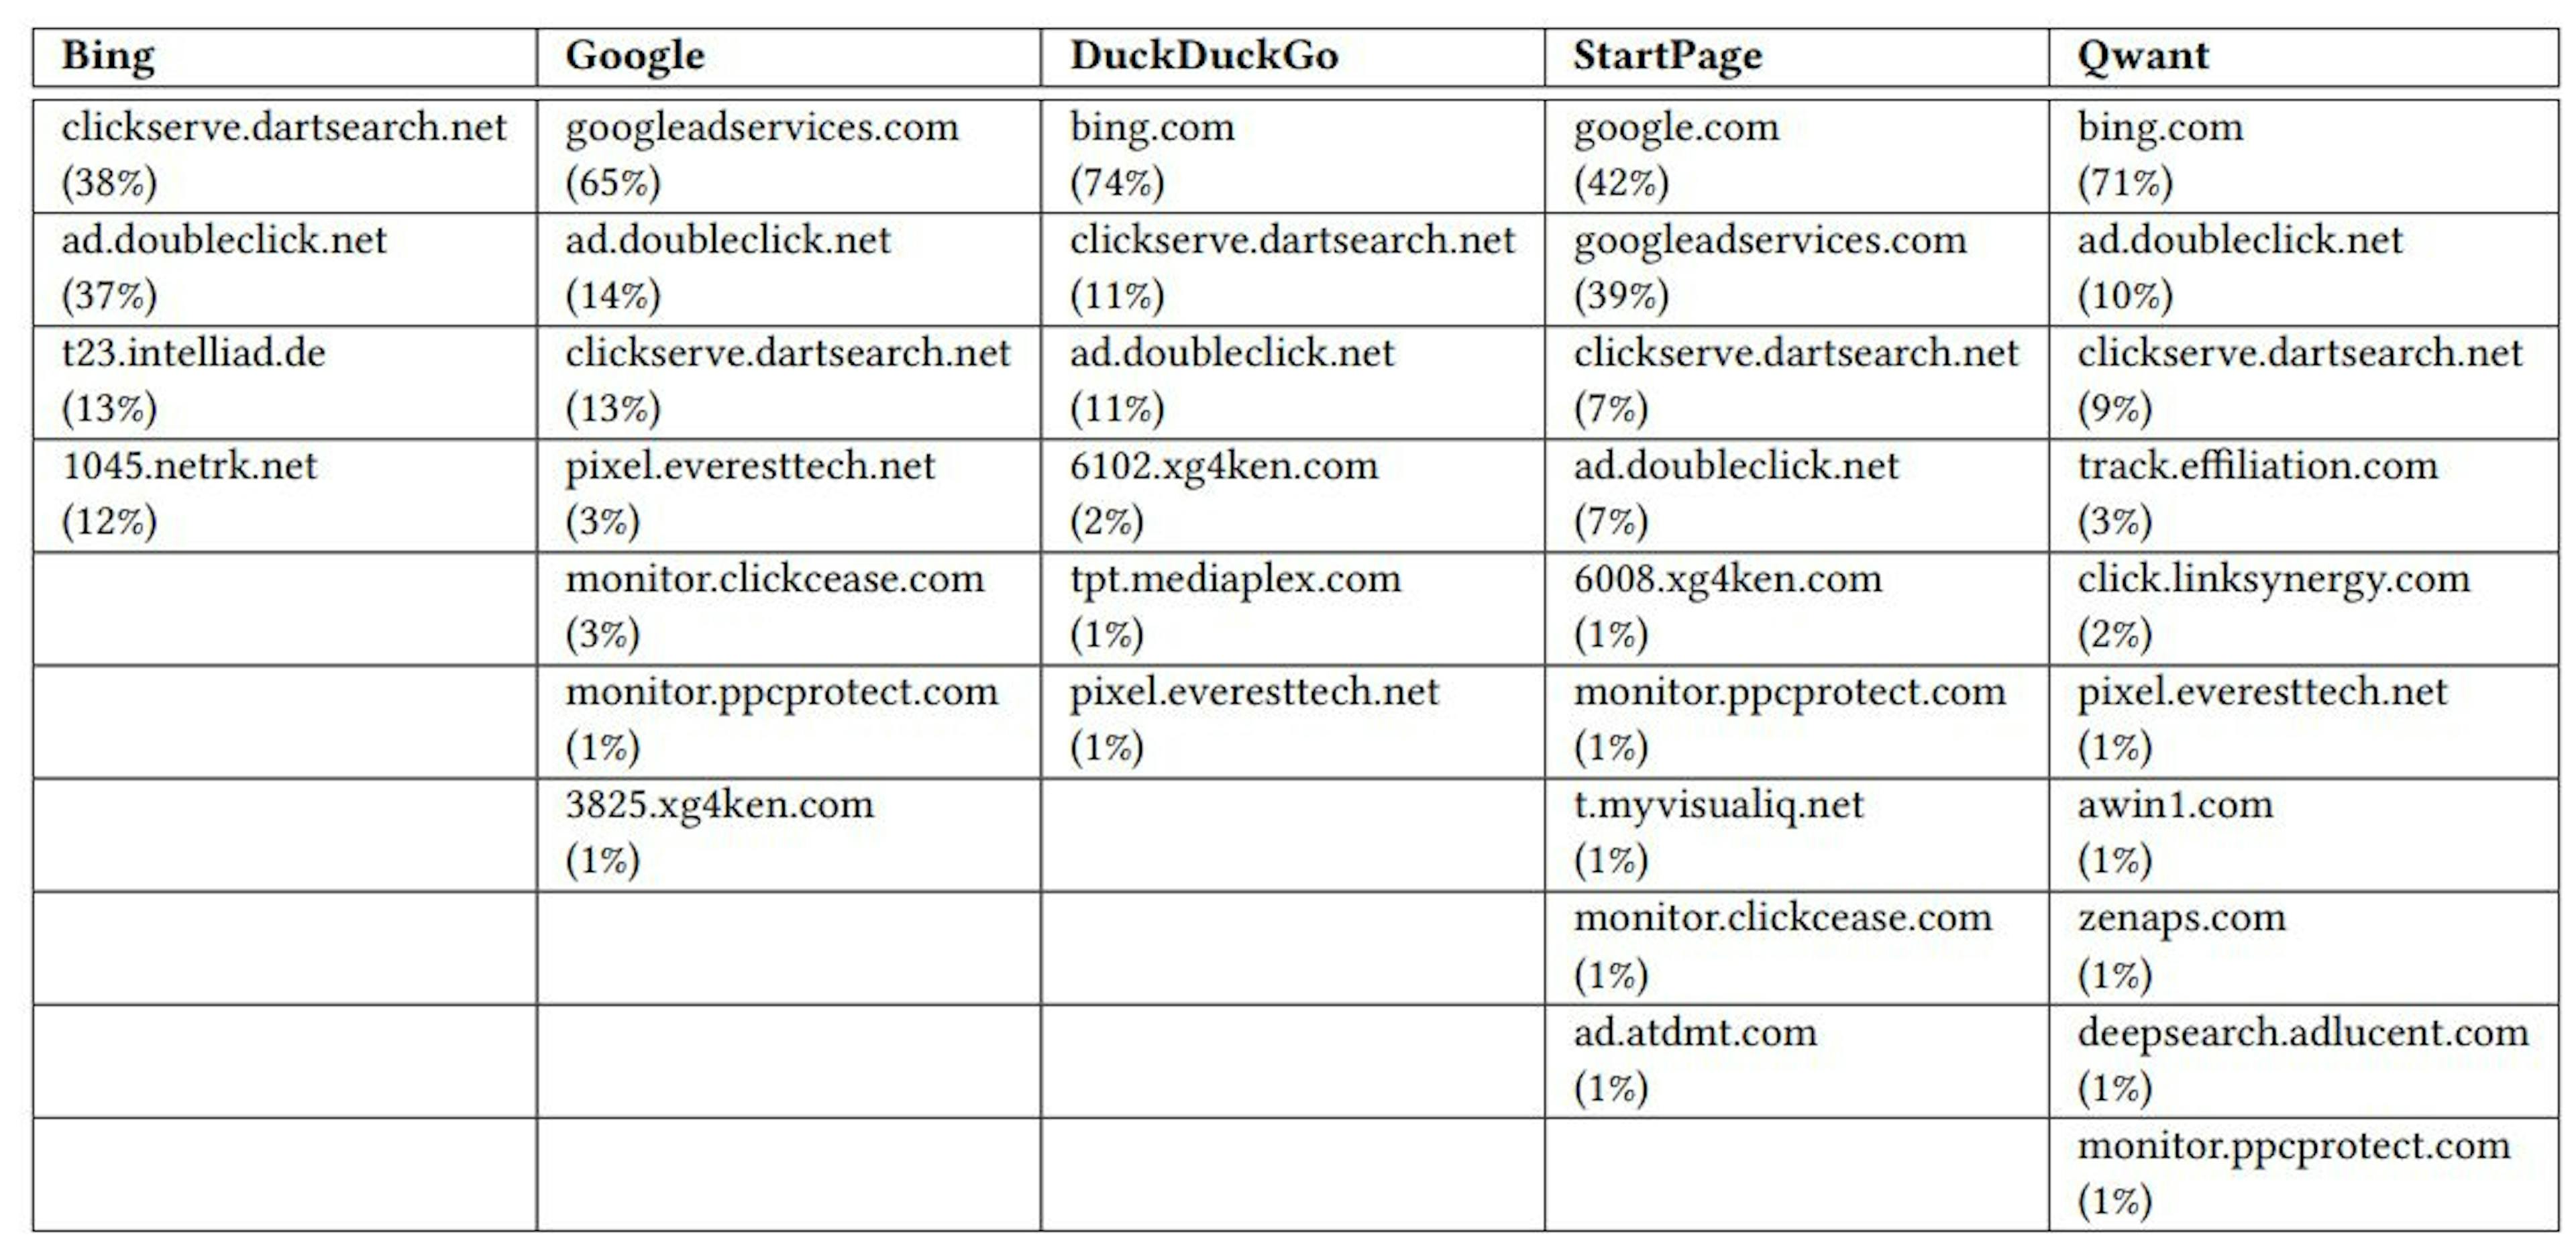 Table 7: Most common redirectors (and their fractions) in domain navigation paths when clicking an ad on search engines.